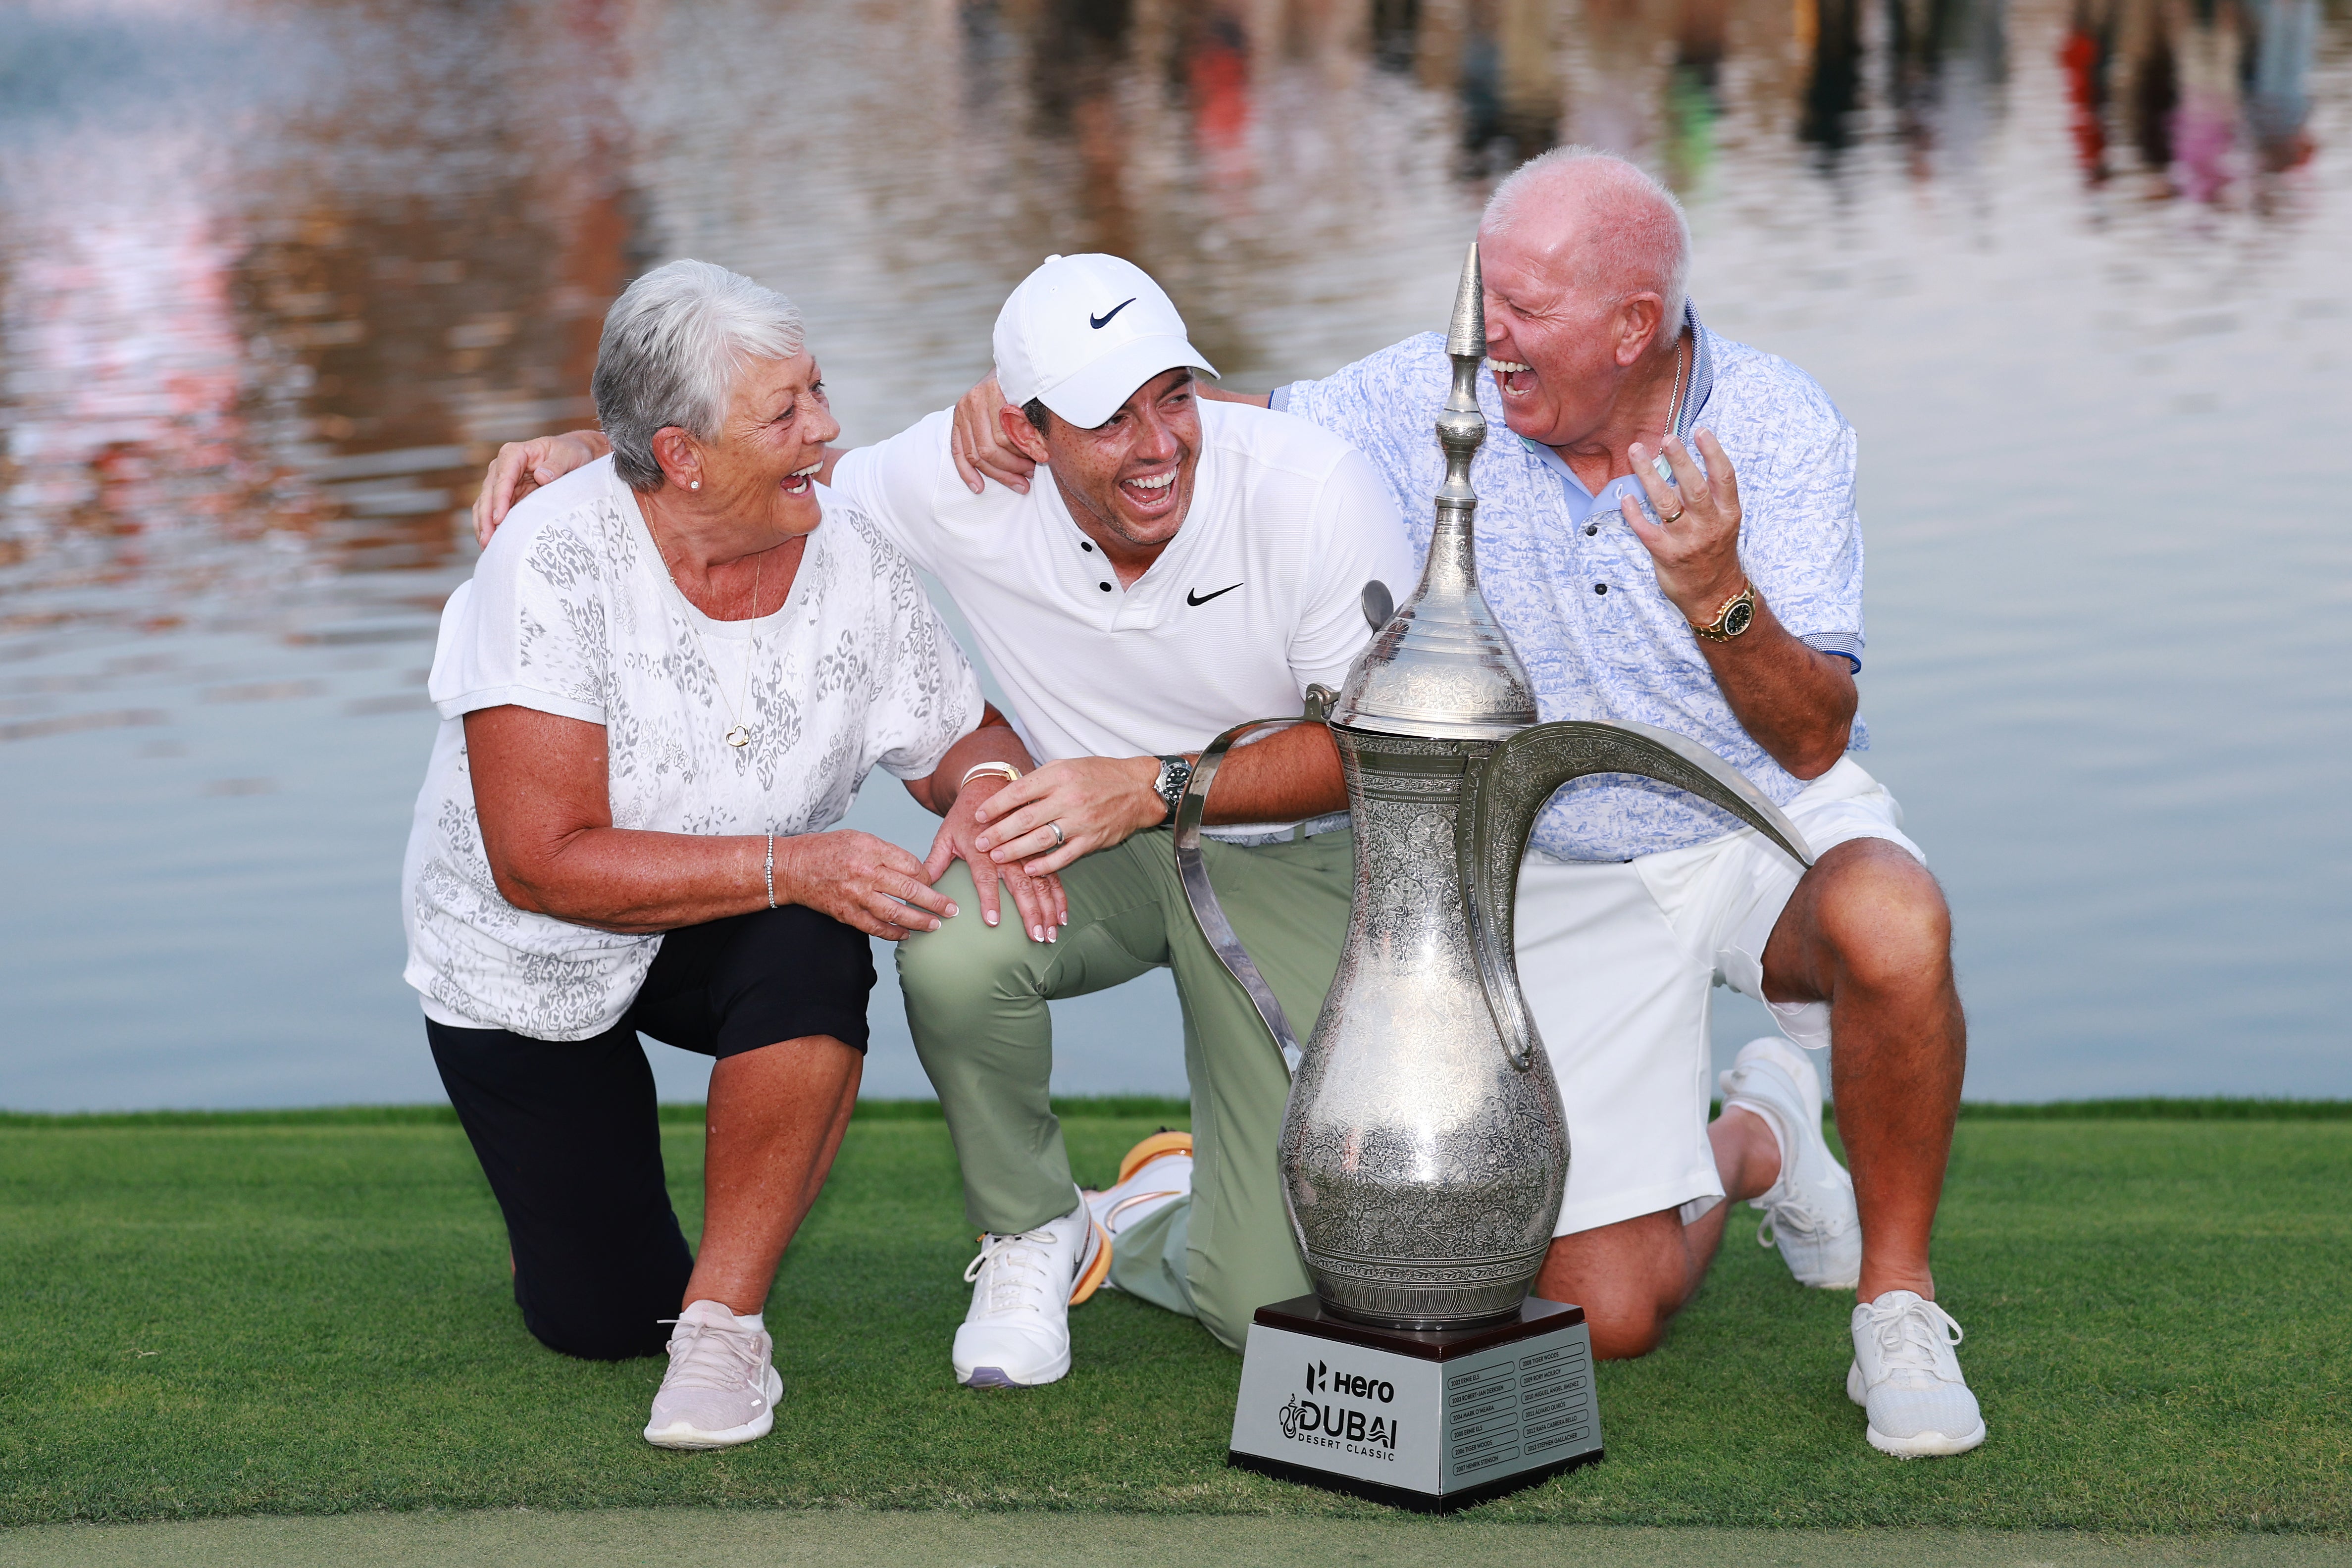 McIlroy won the tournament for a record fourth time, with his parents in attendance